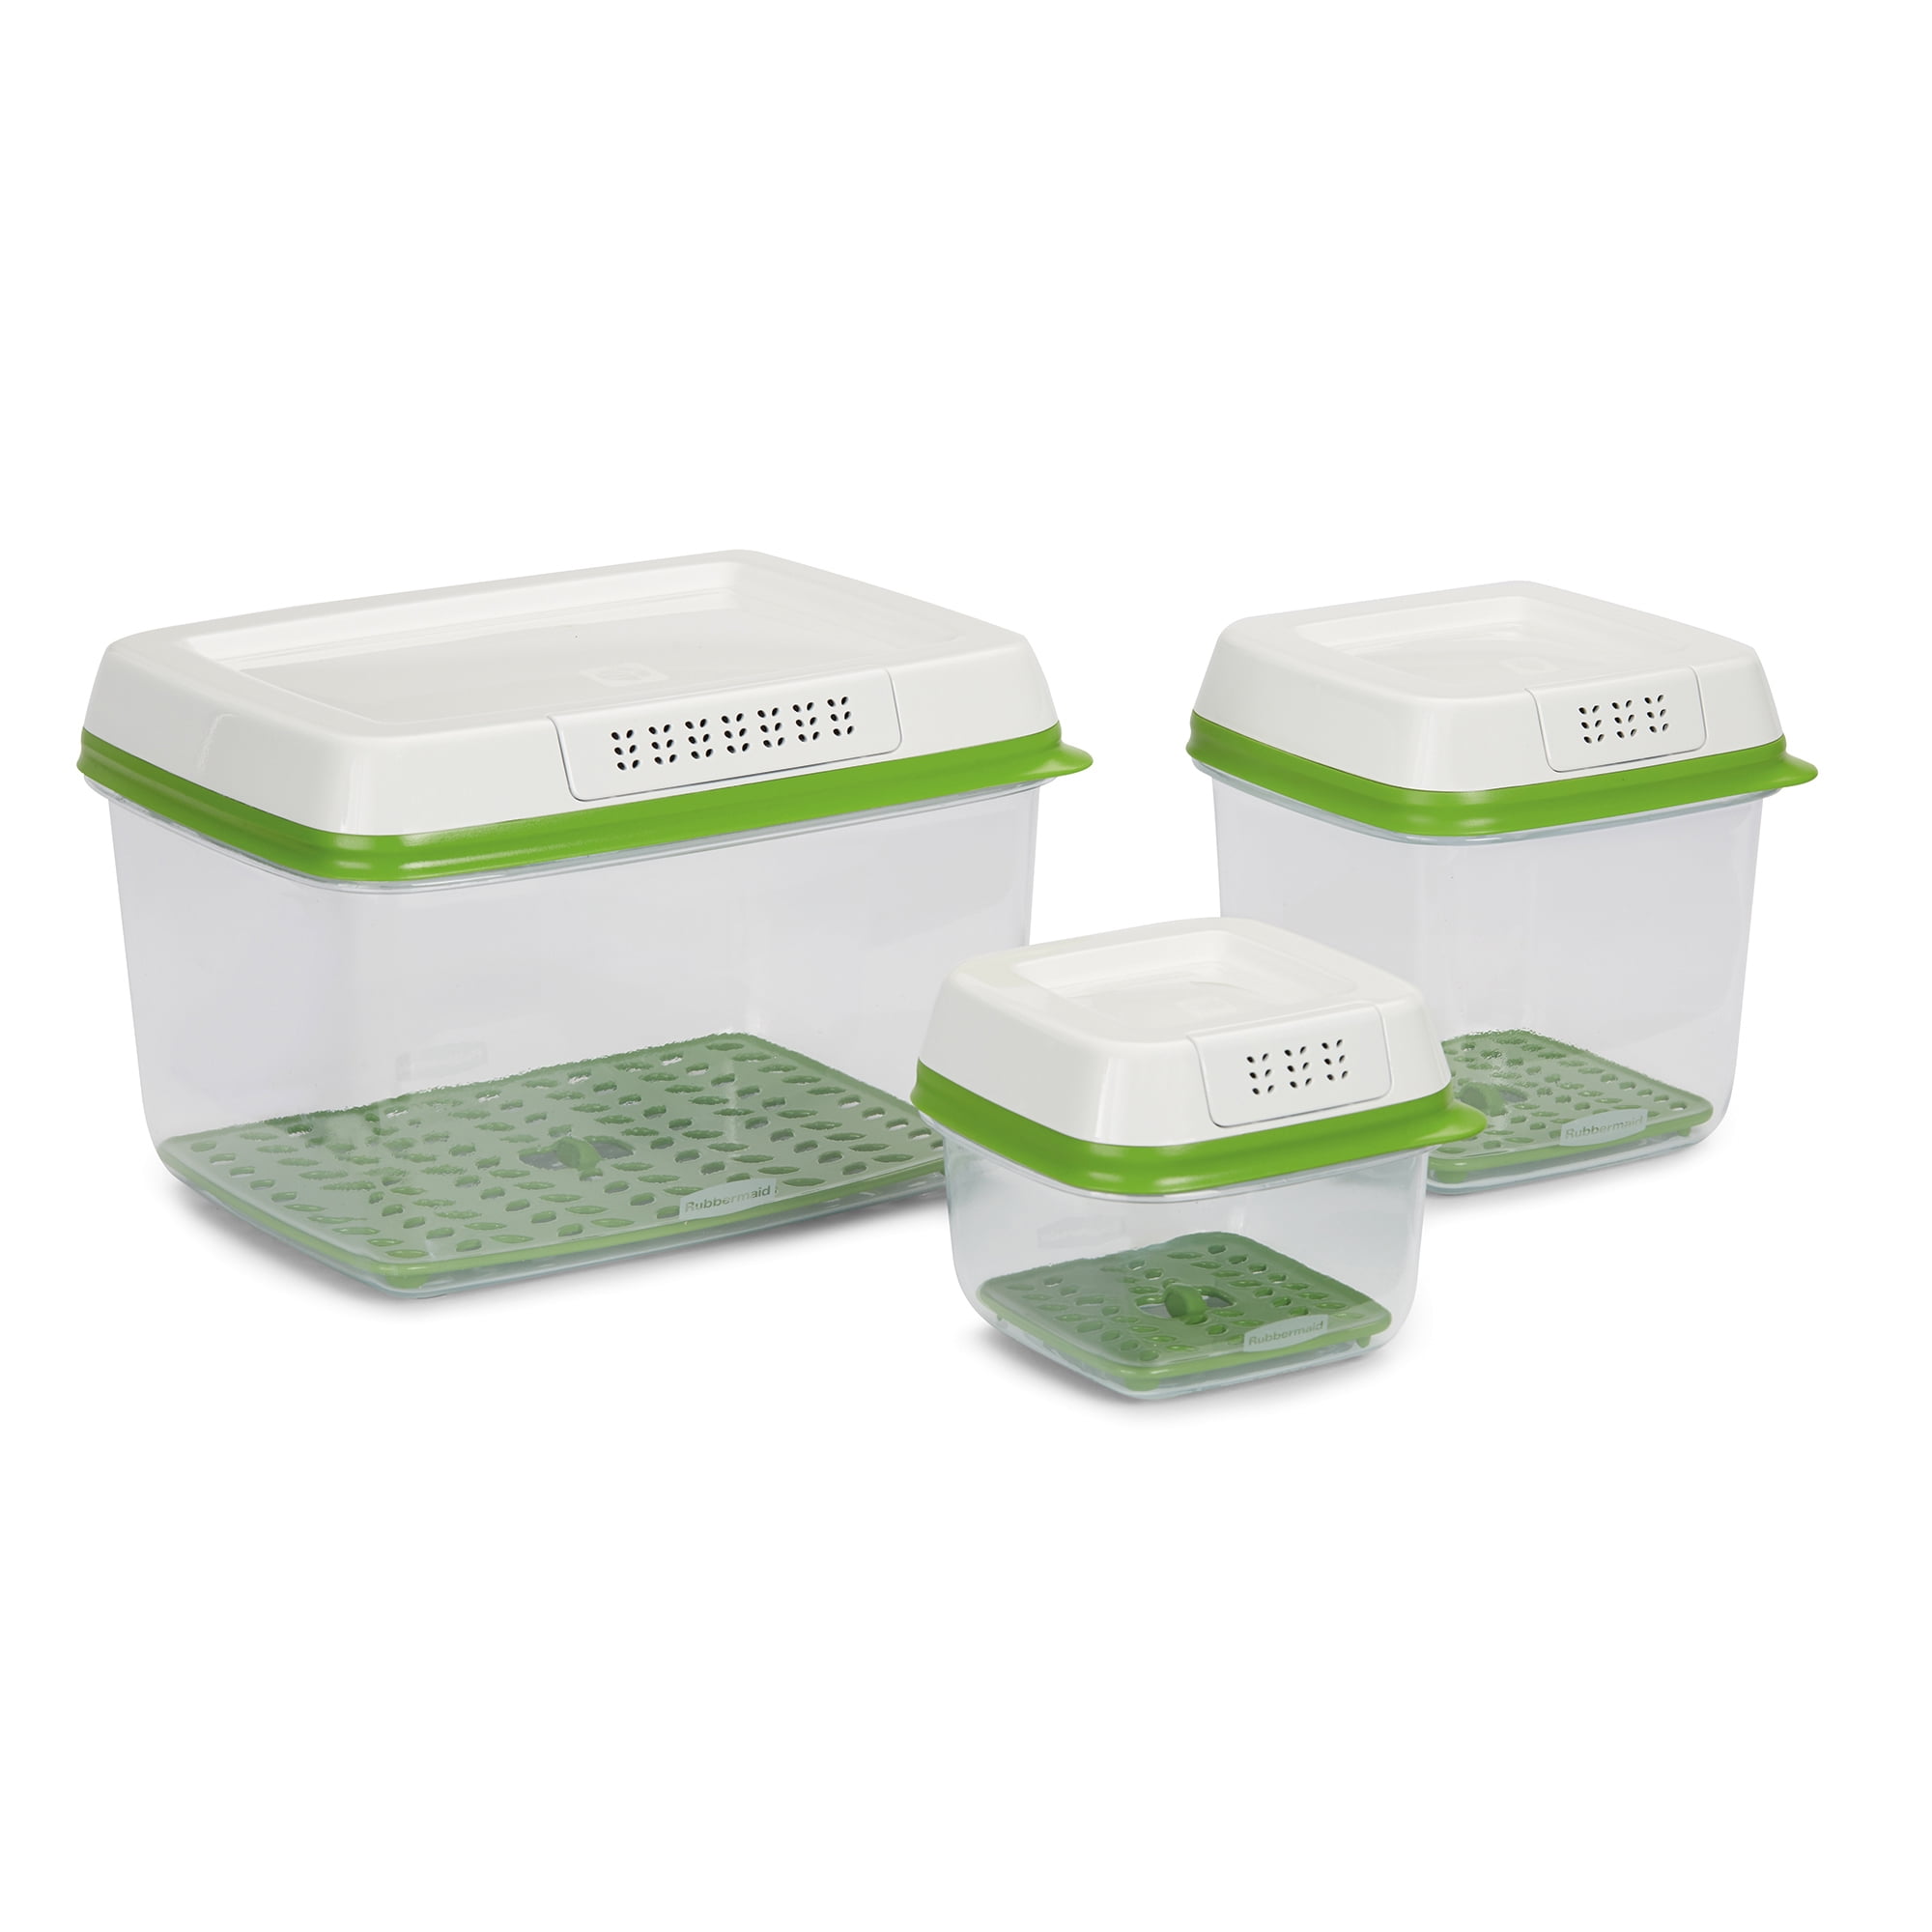 Rubbermaid Freshworks Food Preservation Containers, 6 Piece Set 